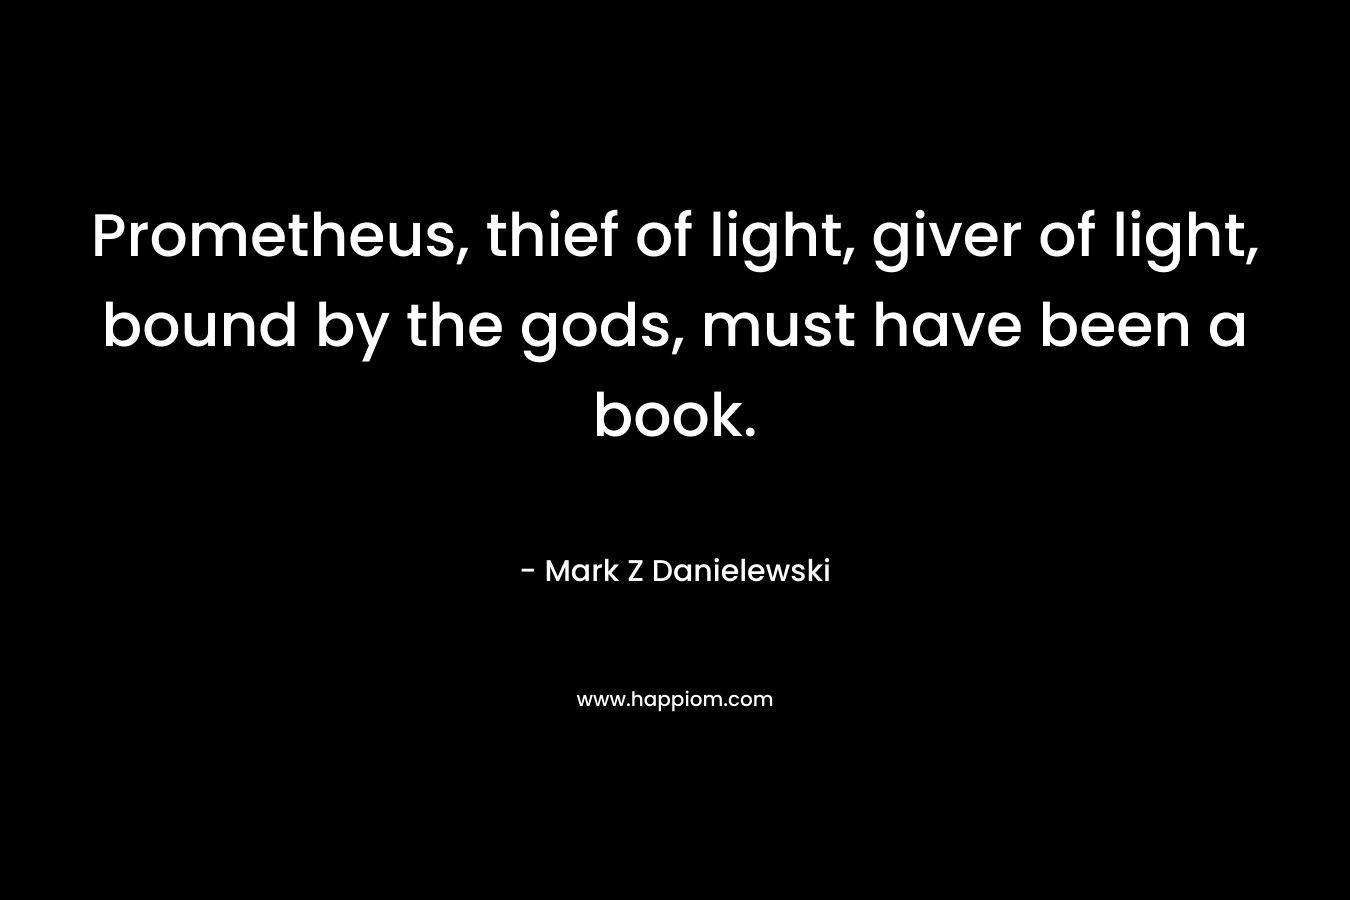 Prometheus, thief of light, giver of light, bound by the gods, must have been a book.